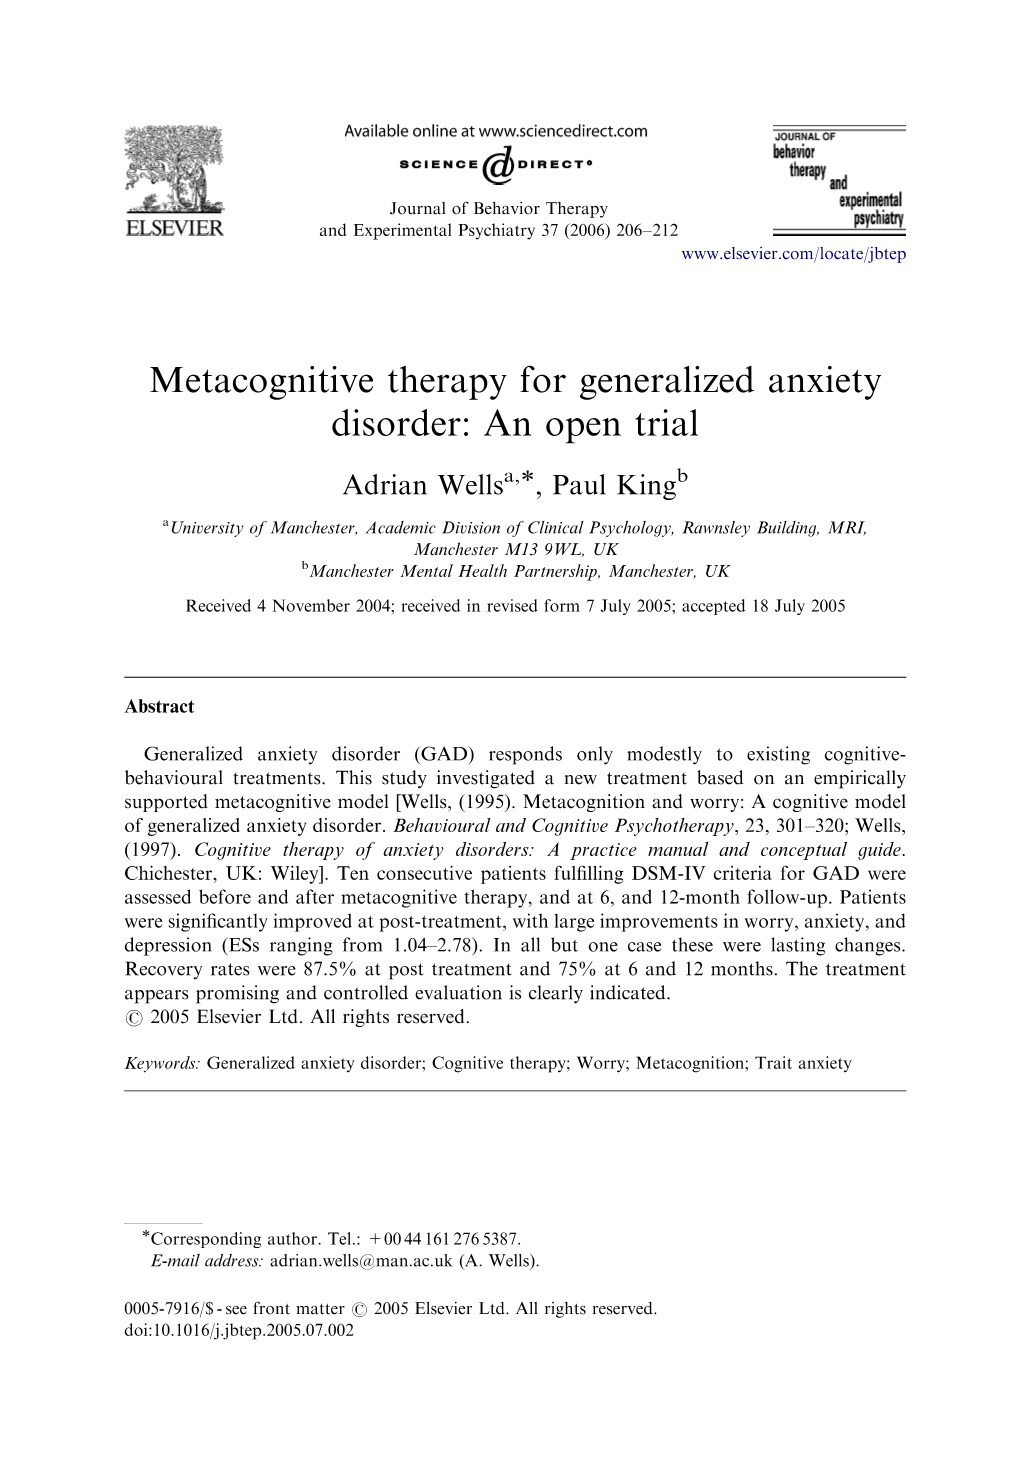 Metacognitive Therapy for Generalized Anxiety Disorder: an Open Trial